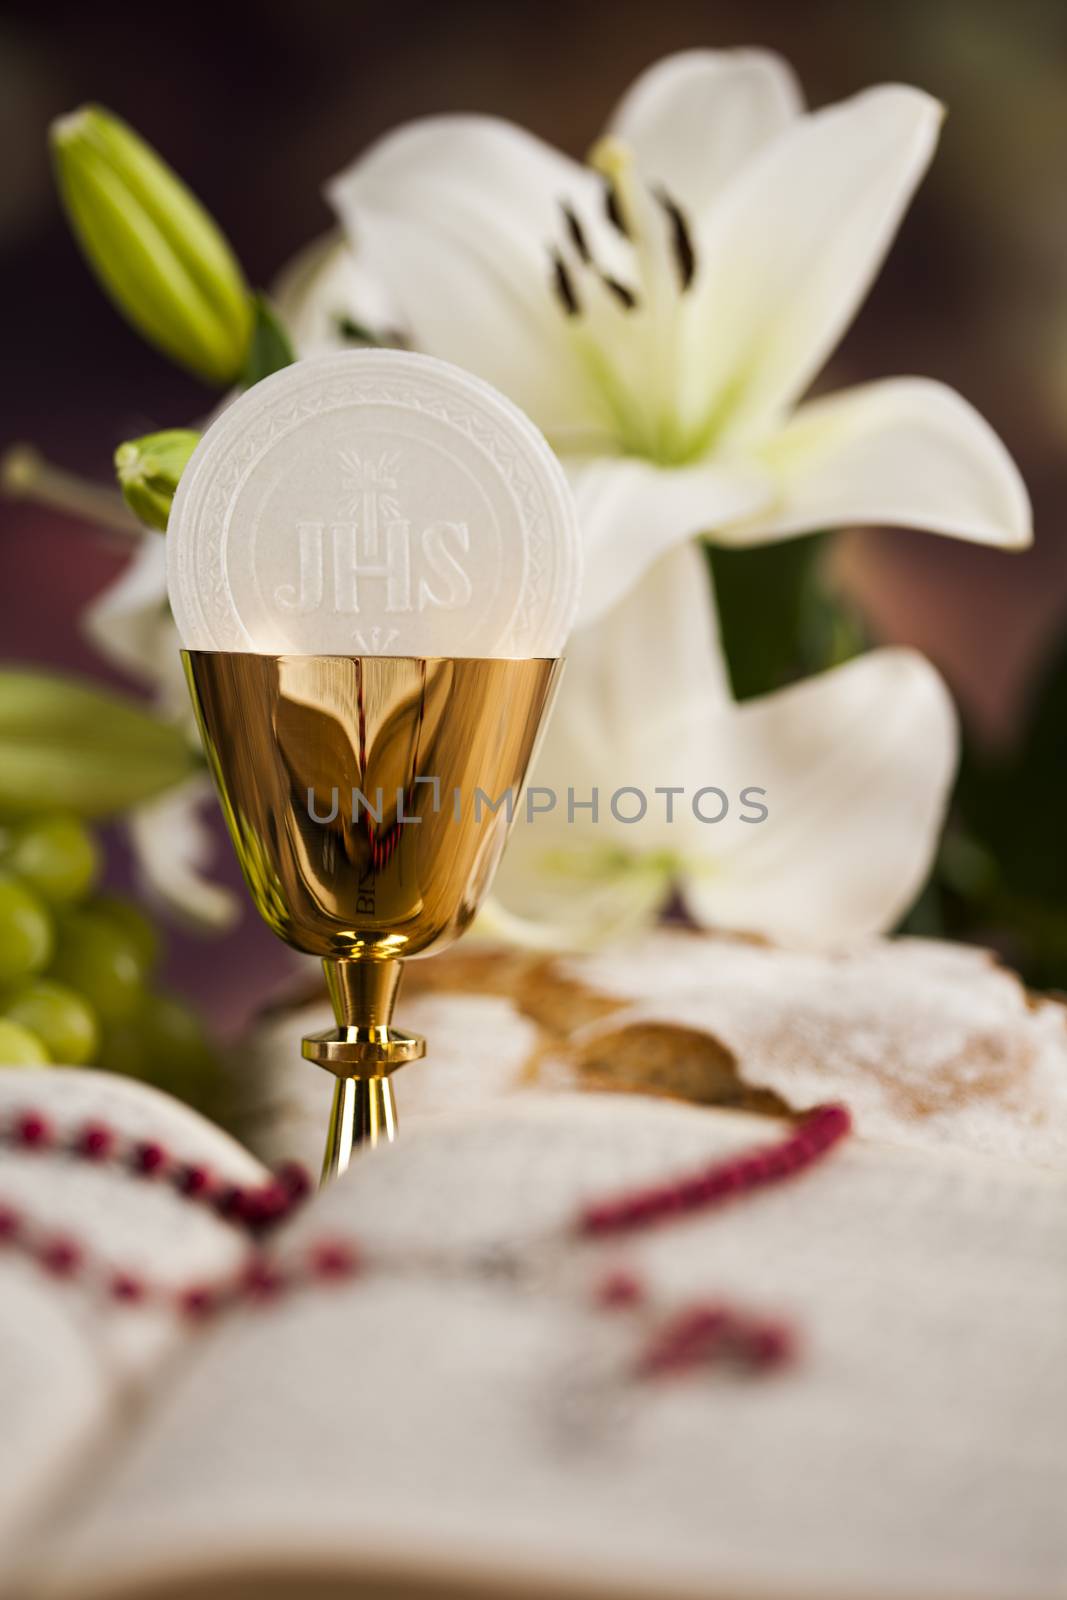 Holy communion a golden chalice with grapes and bread wafers by JanPietruszka